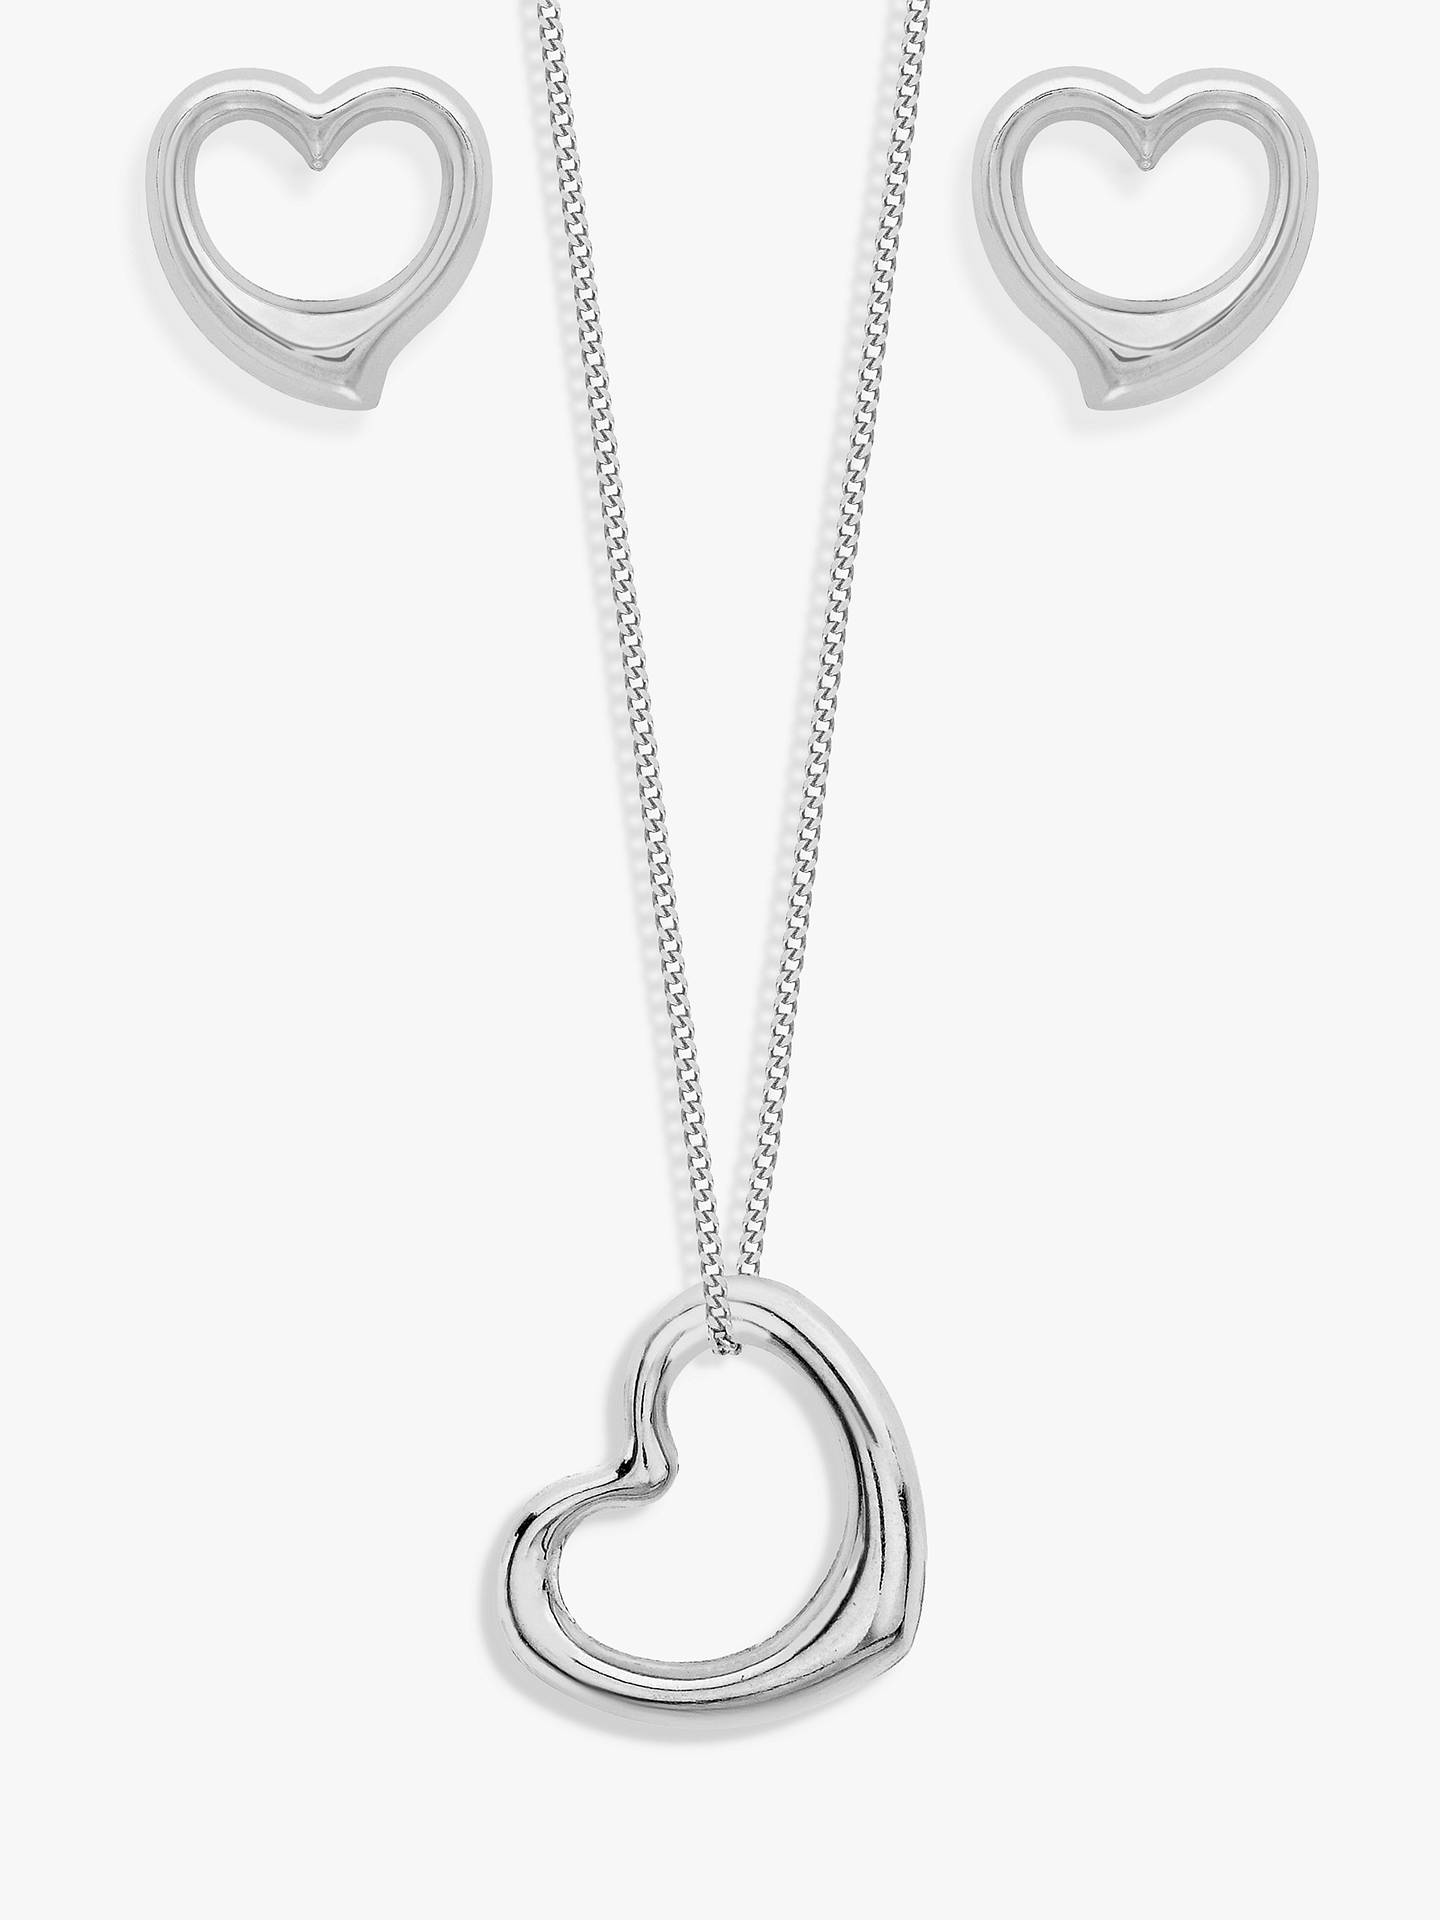 IBB 9ct White Gold Heart Necklace and Stud Earrings Set ...